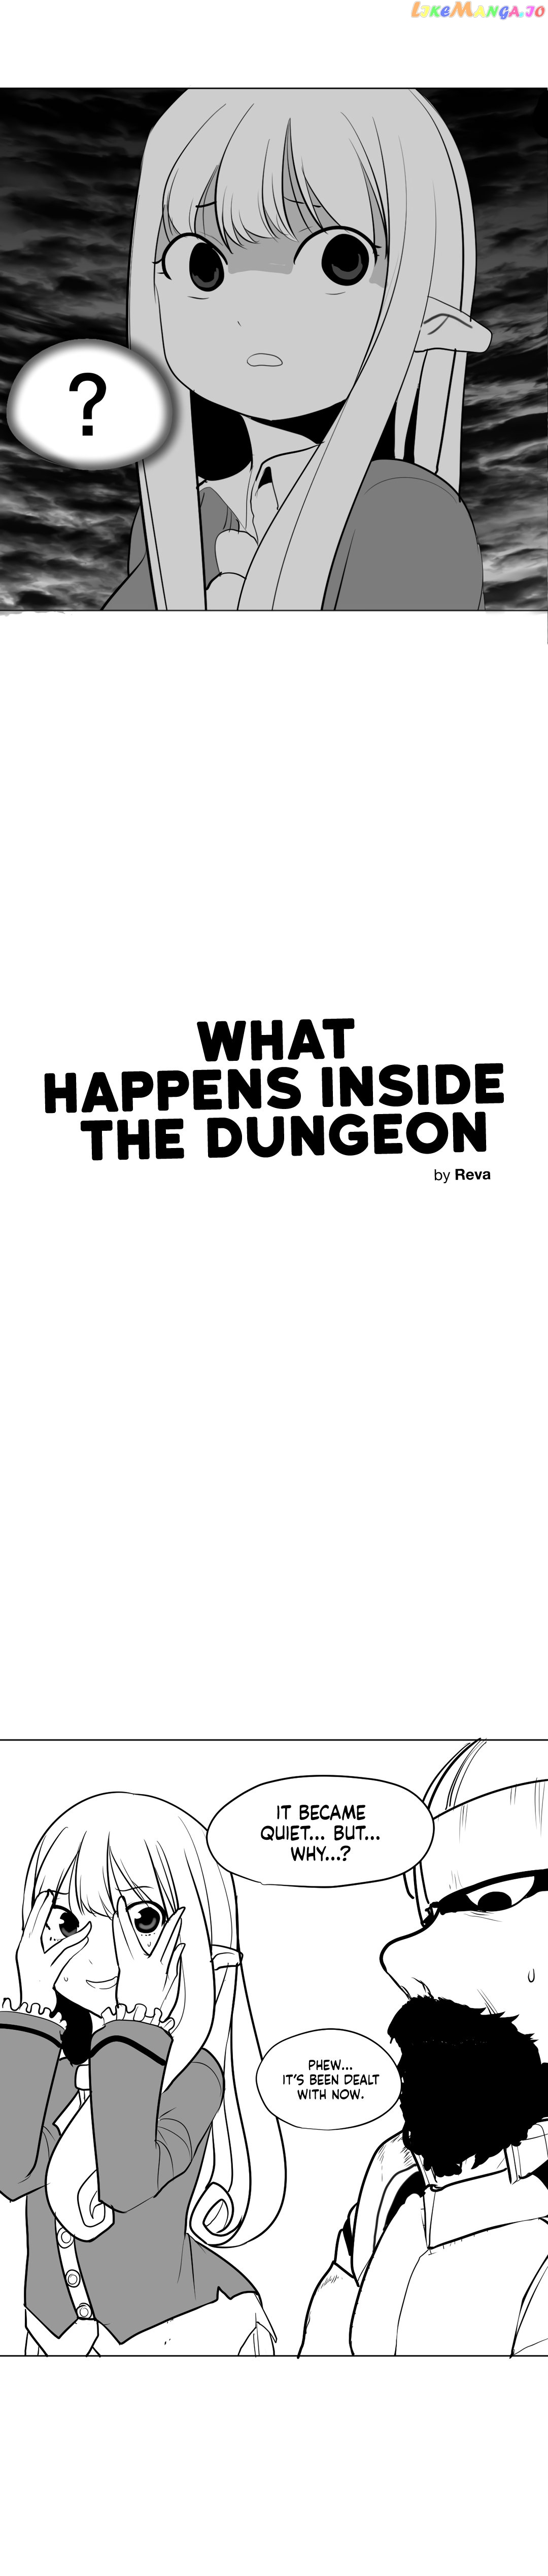 What Happens Inside the Dungeon chapter 3 - page 3